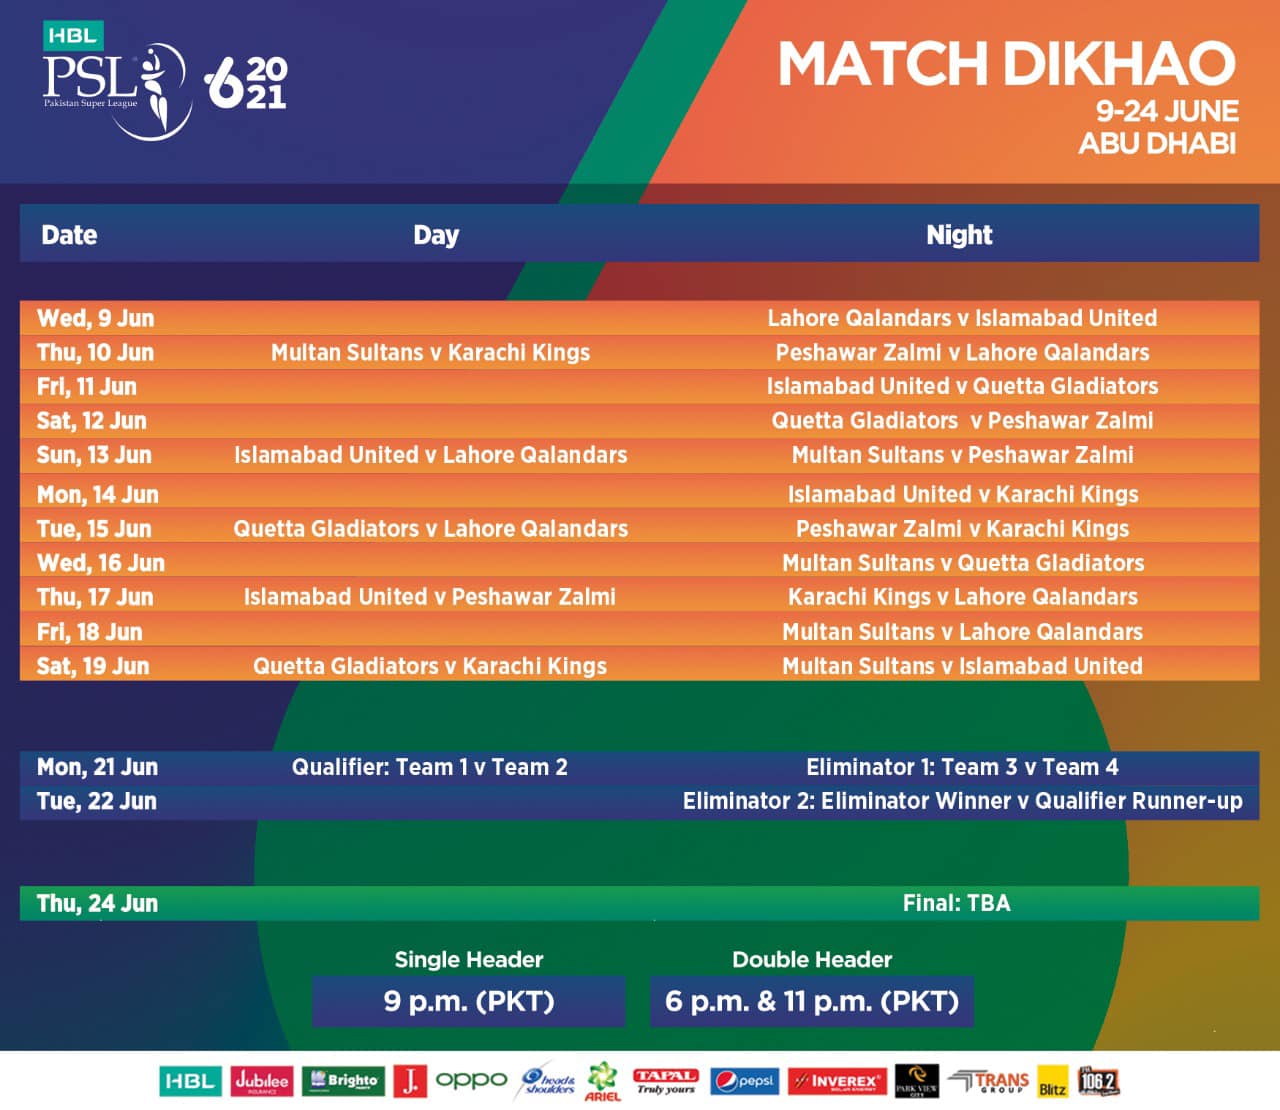 New PSL 2021 Schedule For Remaining Matches Is Now Announced